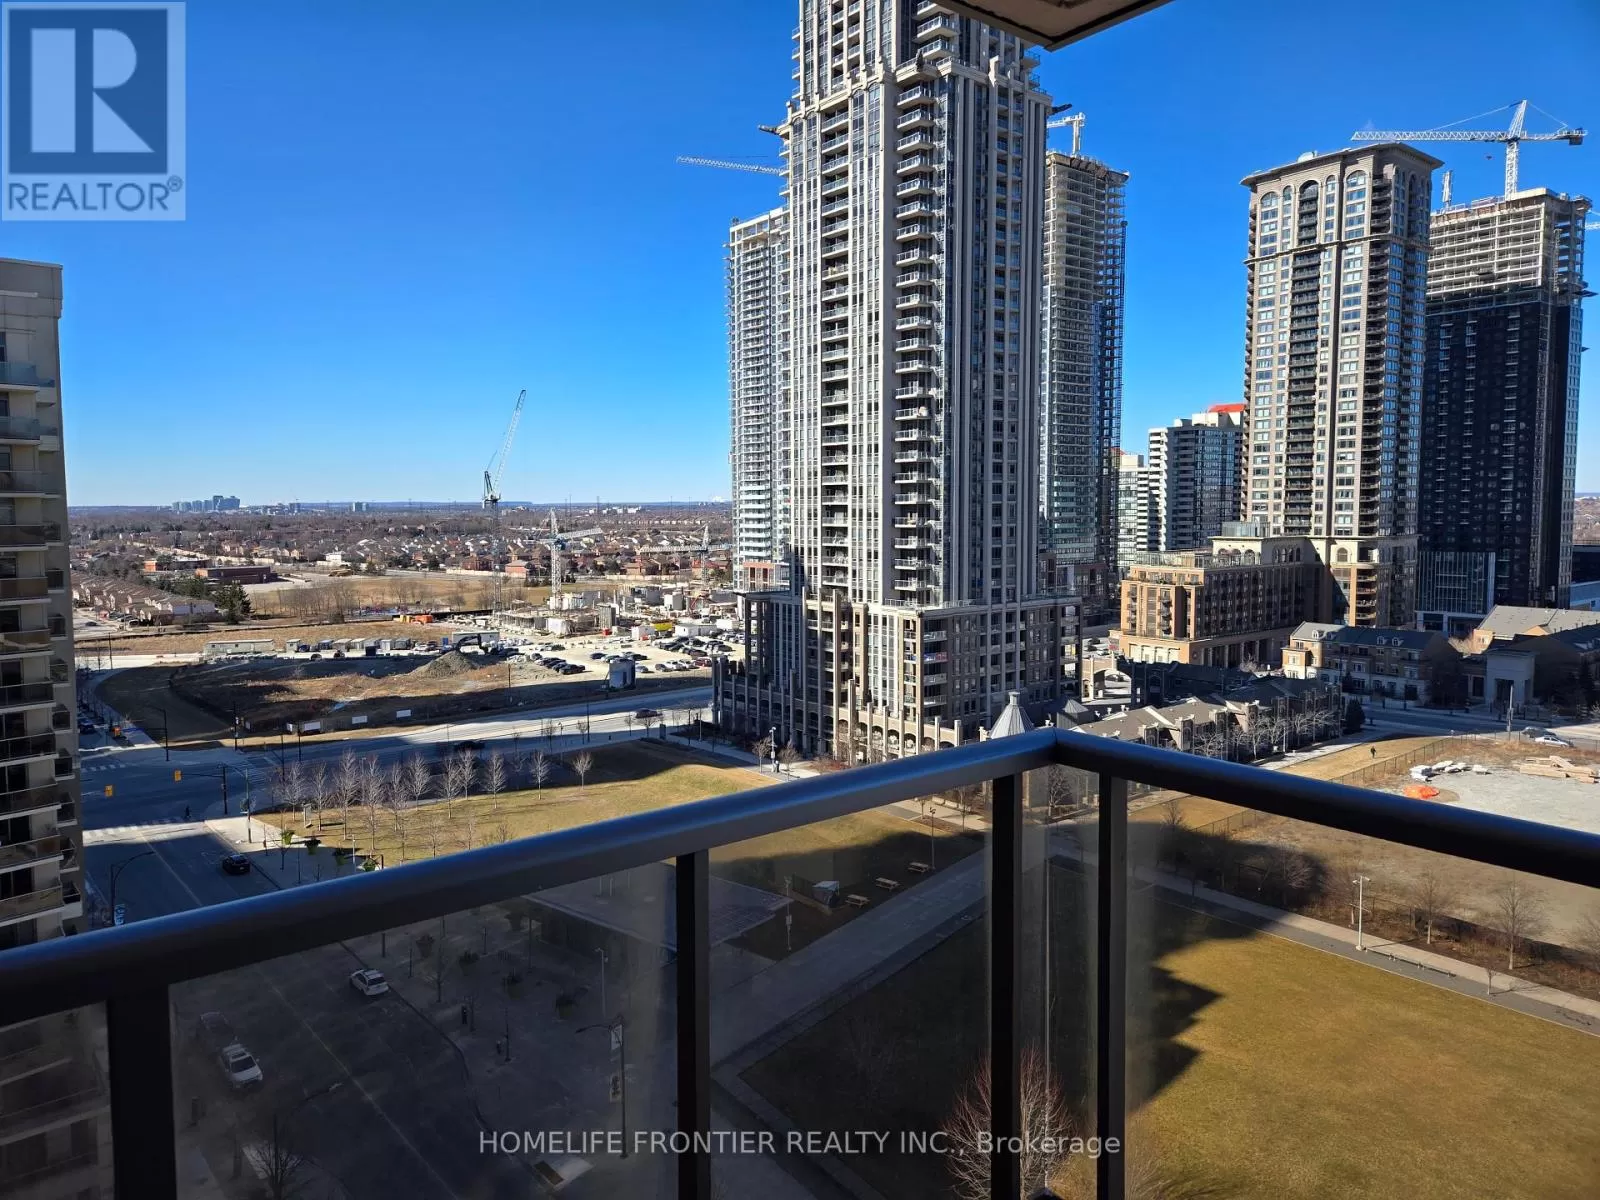 Apartment for rent: 1505 - 4090 Living Arts Drive, Mississauga, Ontario L5B 4M8